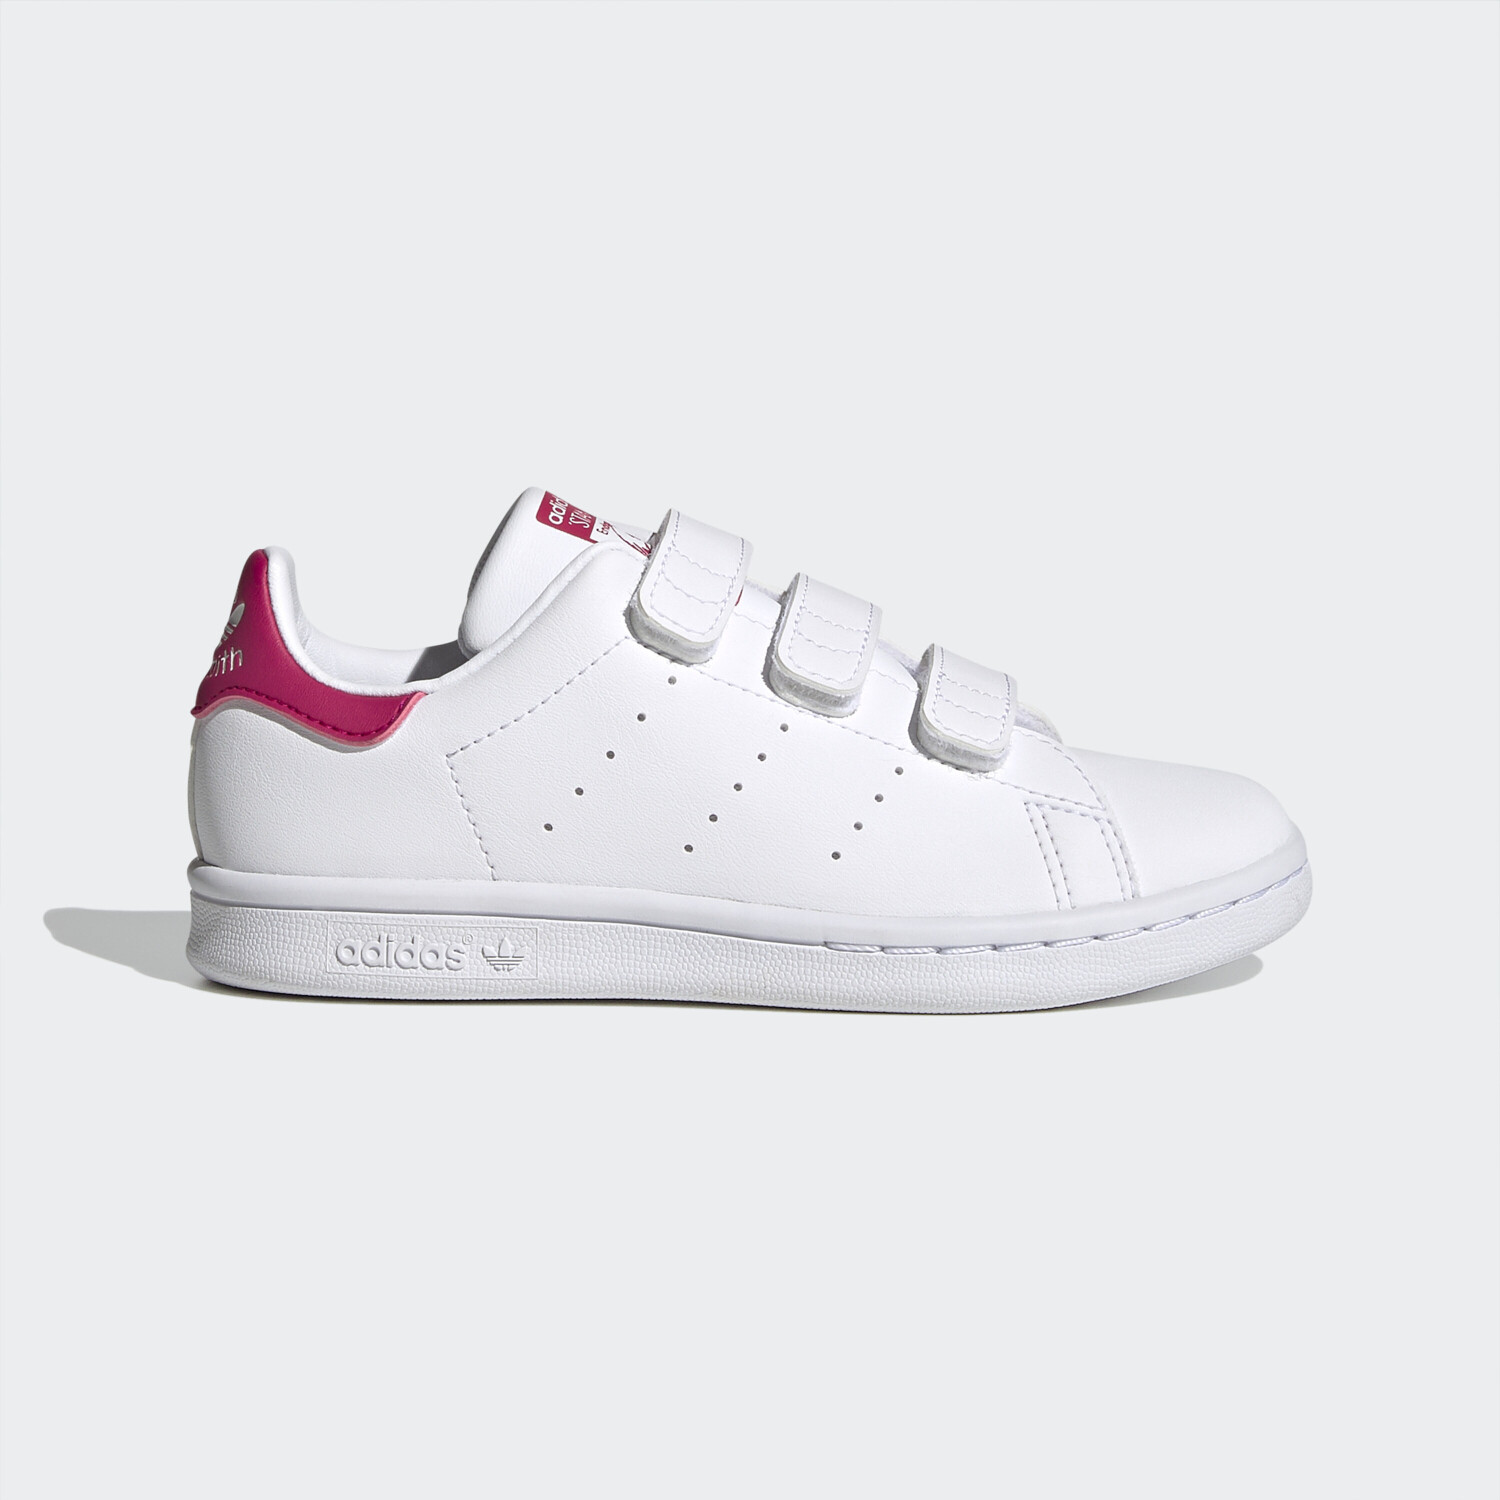 Deals Buy £32.50 Smith Pink on White/Cloud (Today) from Best Kinder White/Bold Adidas – Cloud Stan